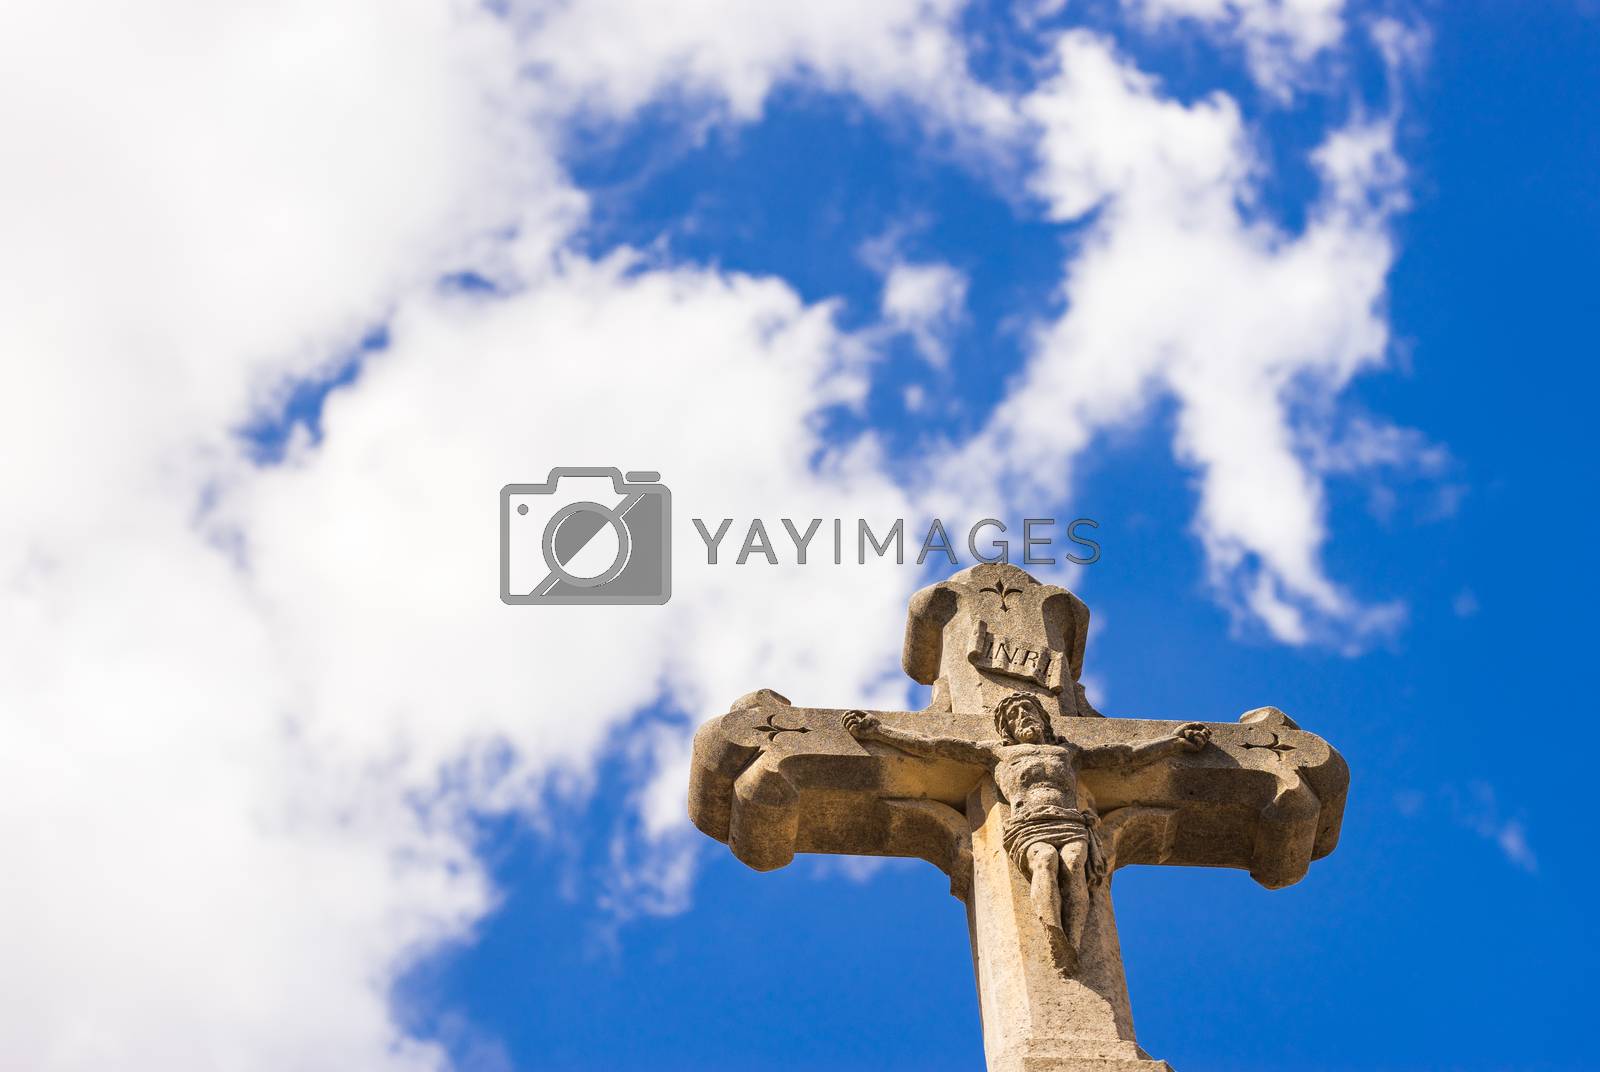 Royalty free image of Cross against blue cloudy sky, religion christianity concepts background by Vulcano